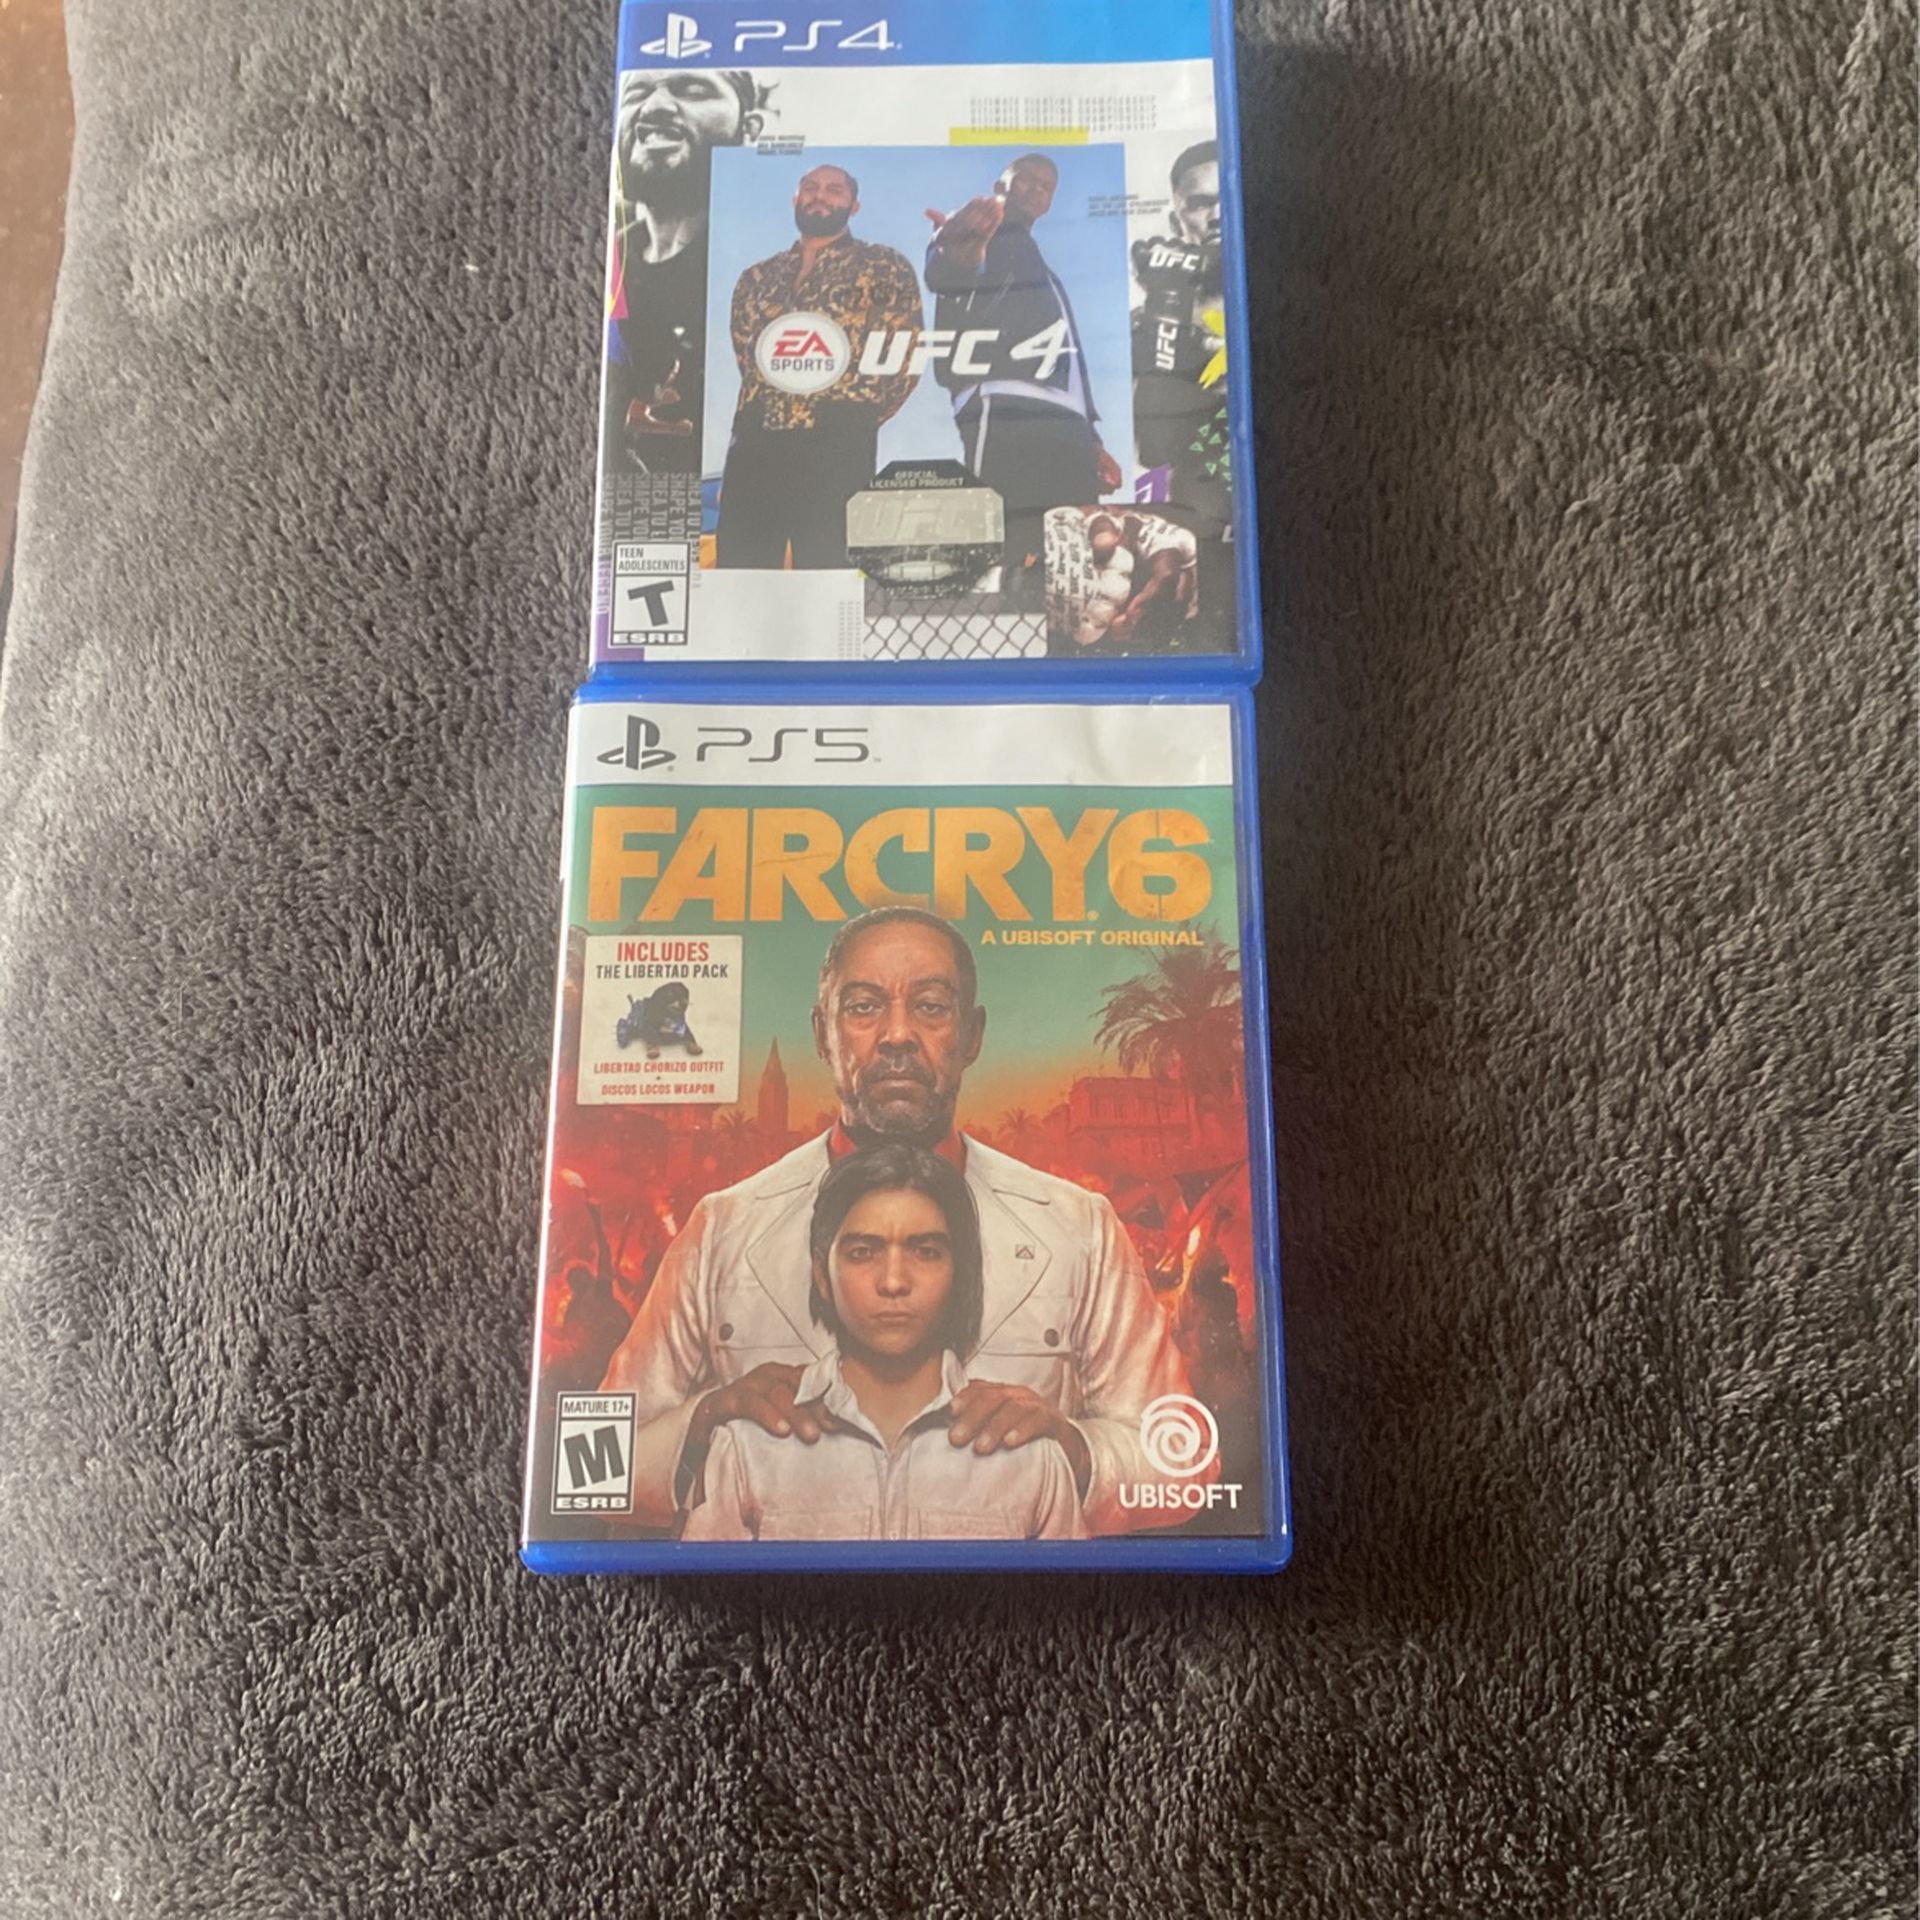 PS4 Game And Ps5 Game